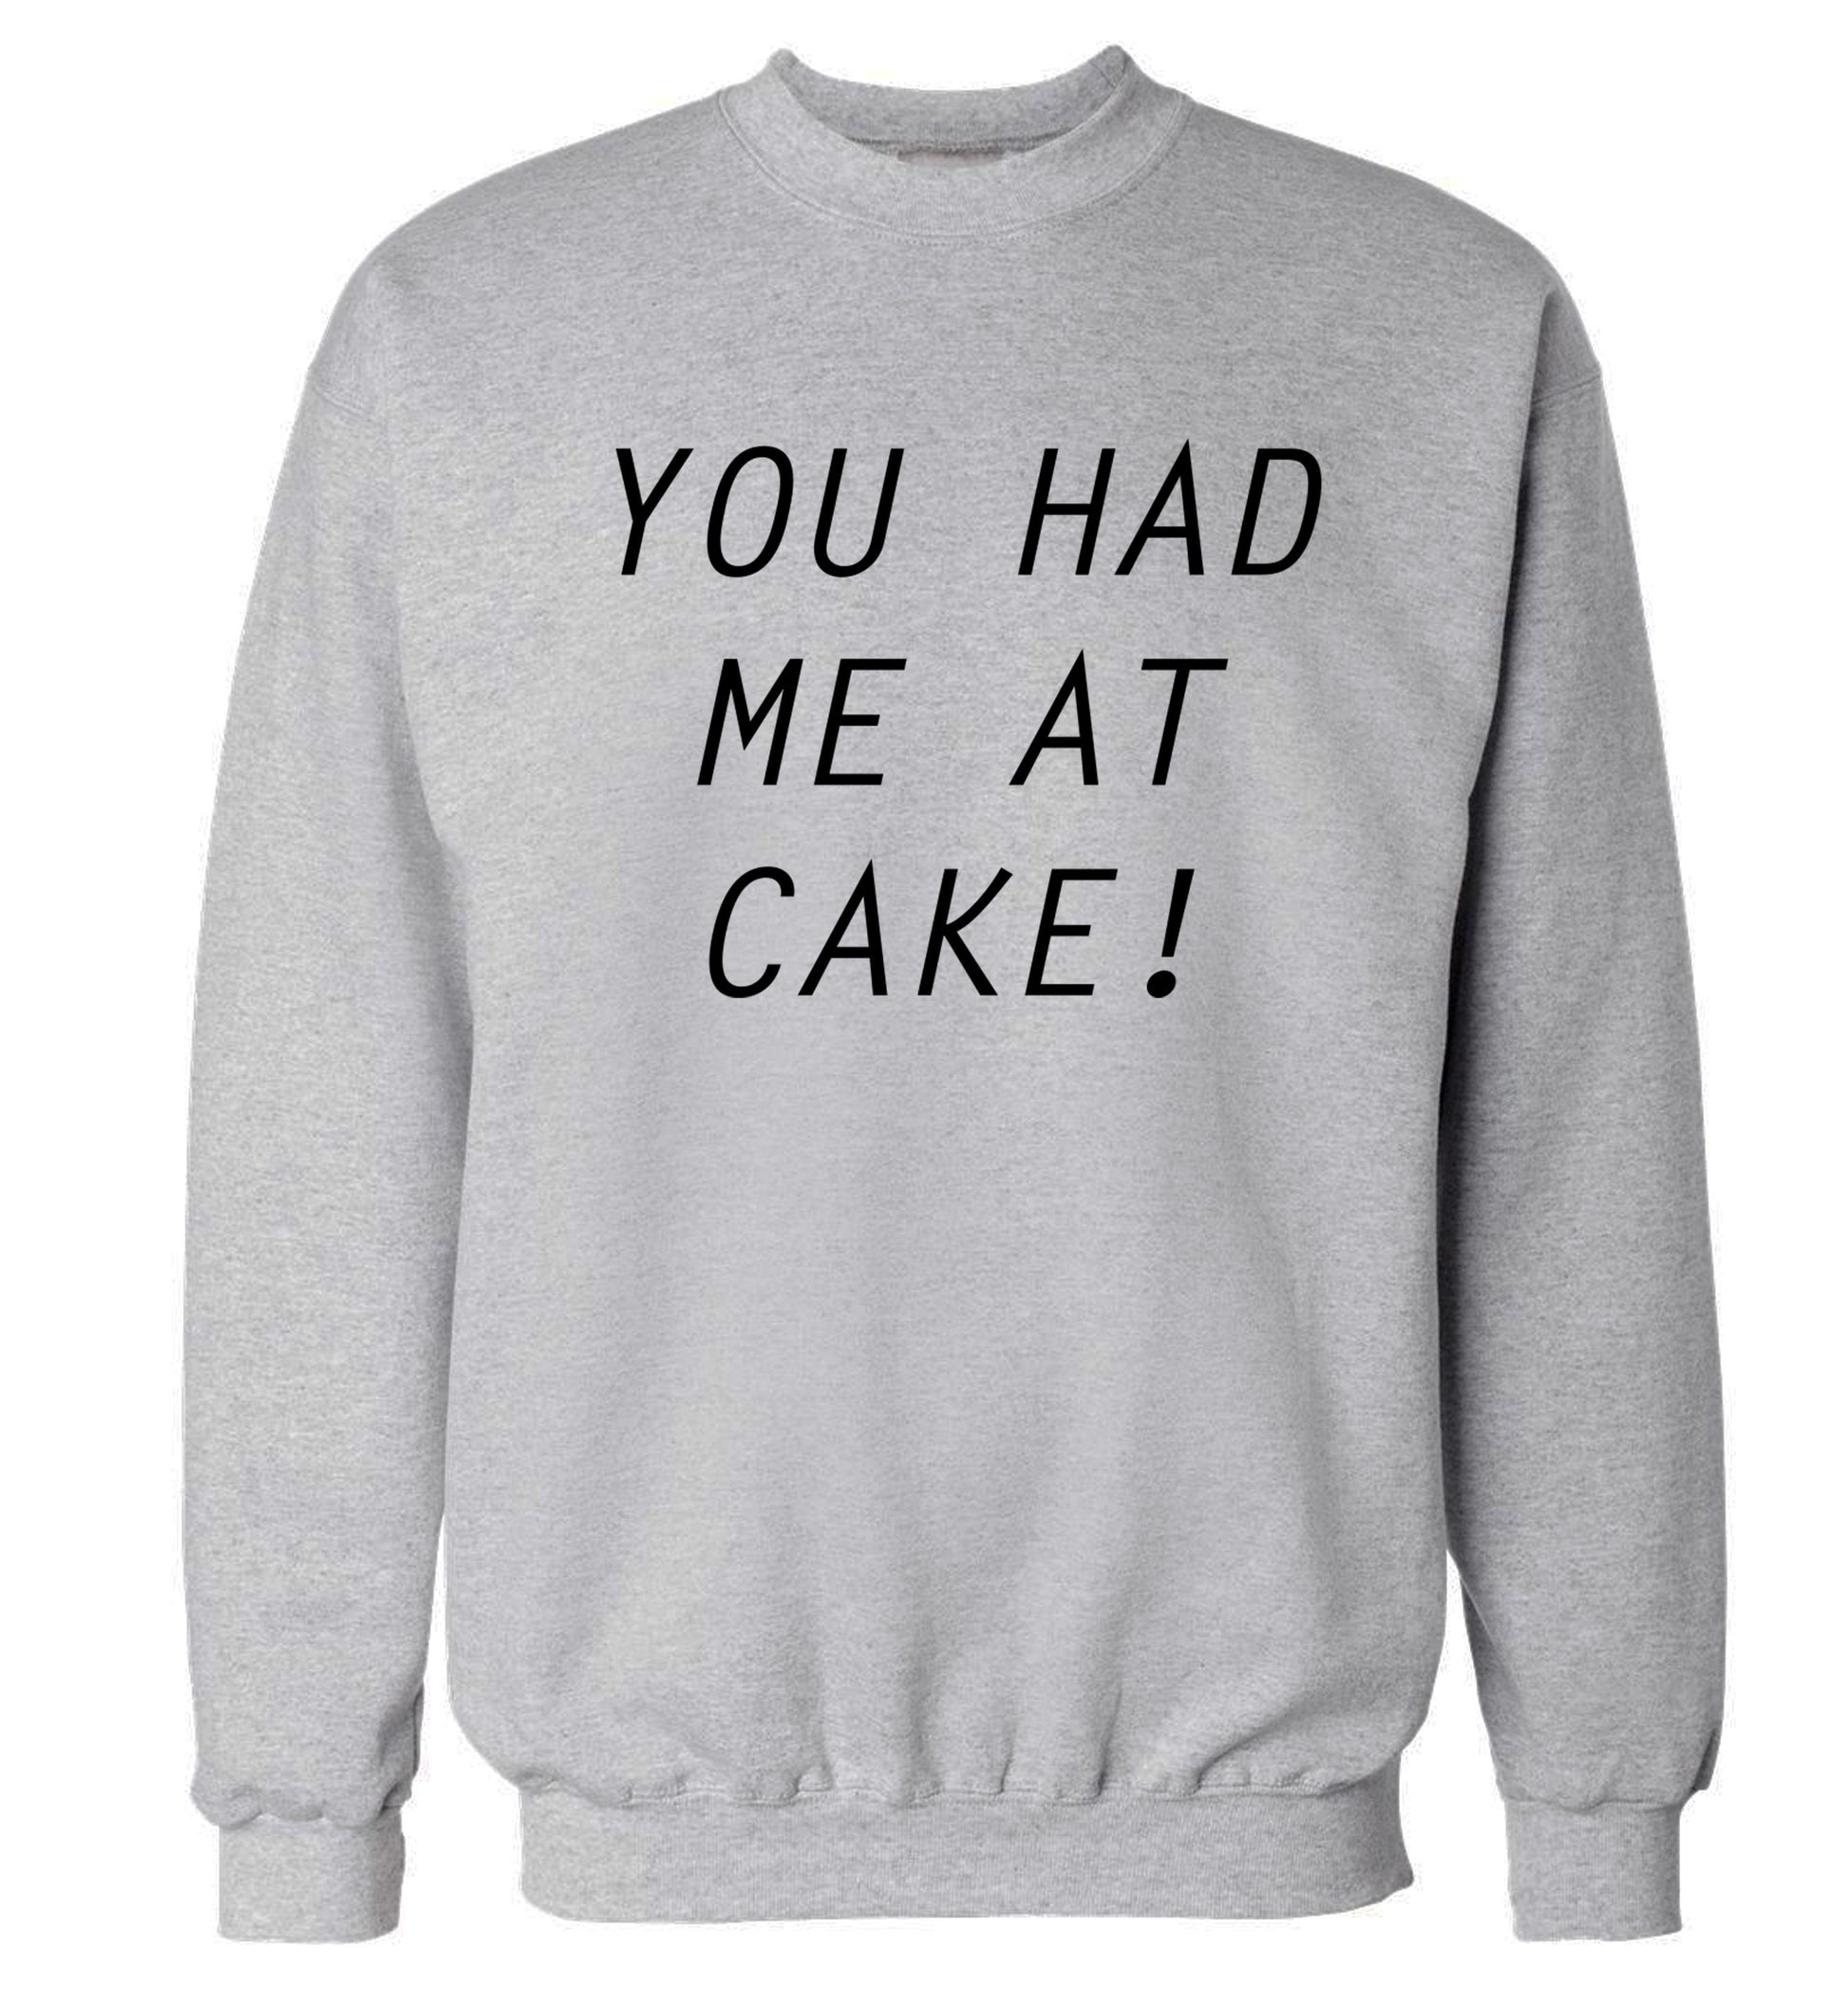 You had me at cake Adult's unisex grey Sweater 2XL